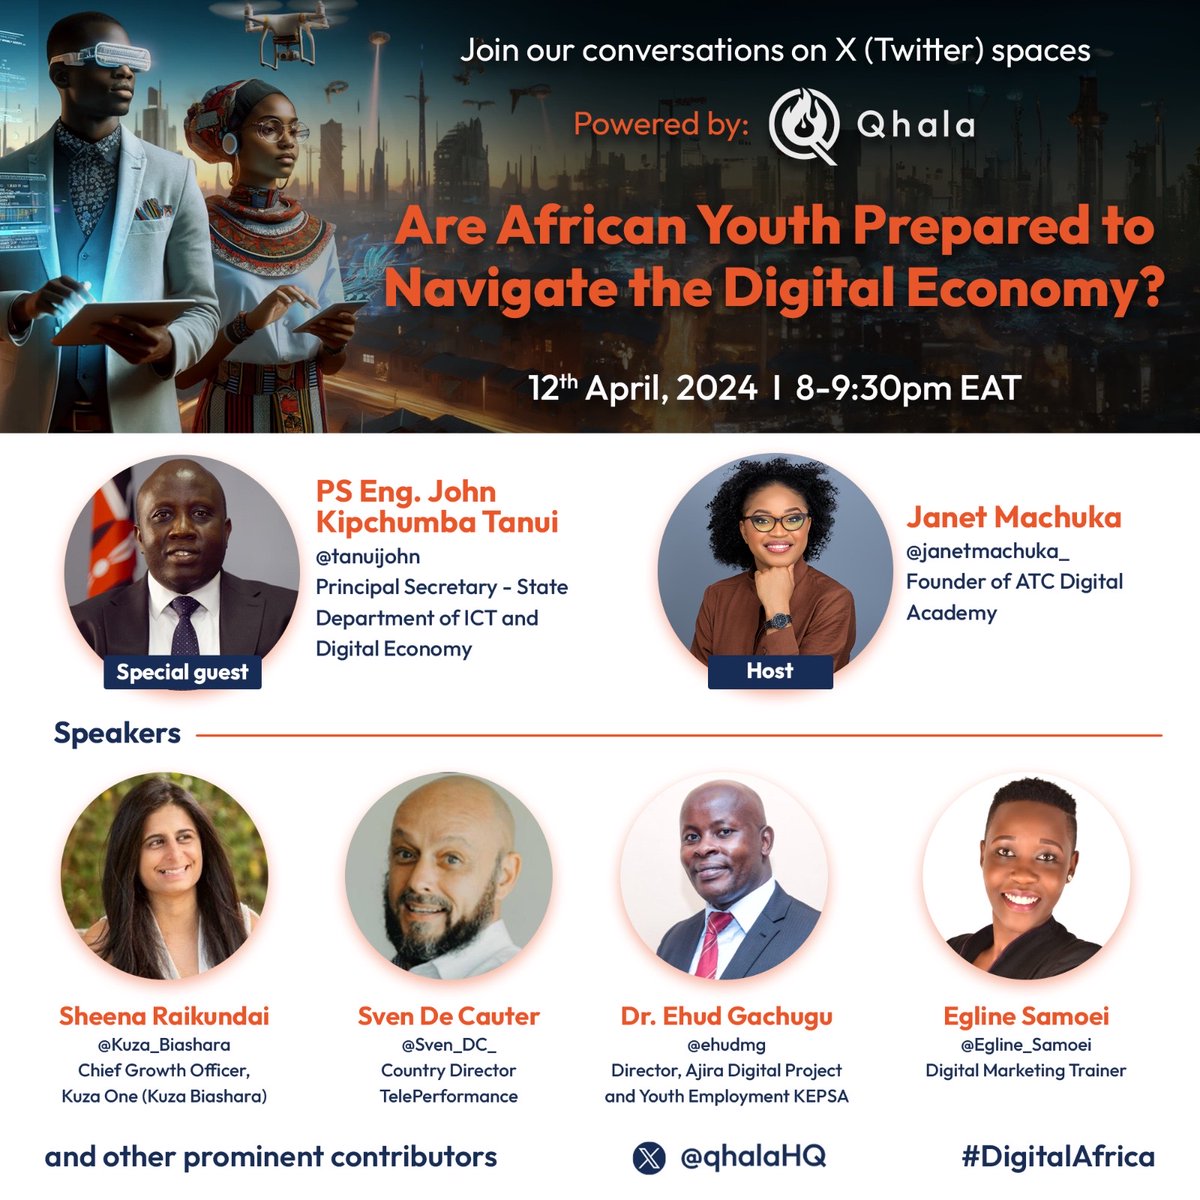 We'll be live this week! Don't miss the opportunity to engage with experts exploring digital skills, the digital economy and the future of work. Join the discussion on X this week. Set a reminder here: twitter.com/i/spaces/1lPJq…

#YouthDigitalReadiness  #TechinAfrica #FutureOfWork